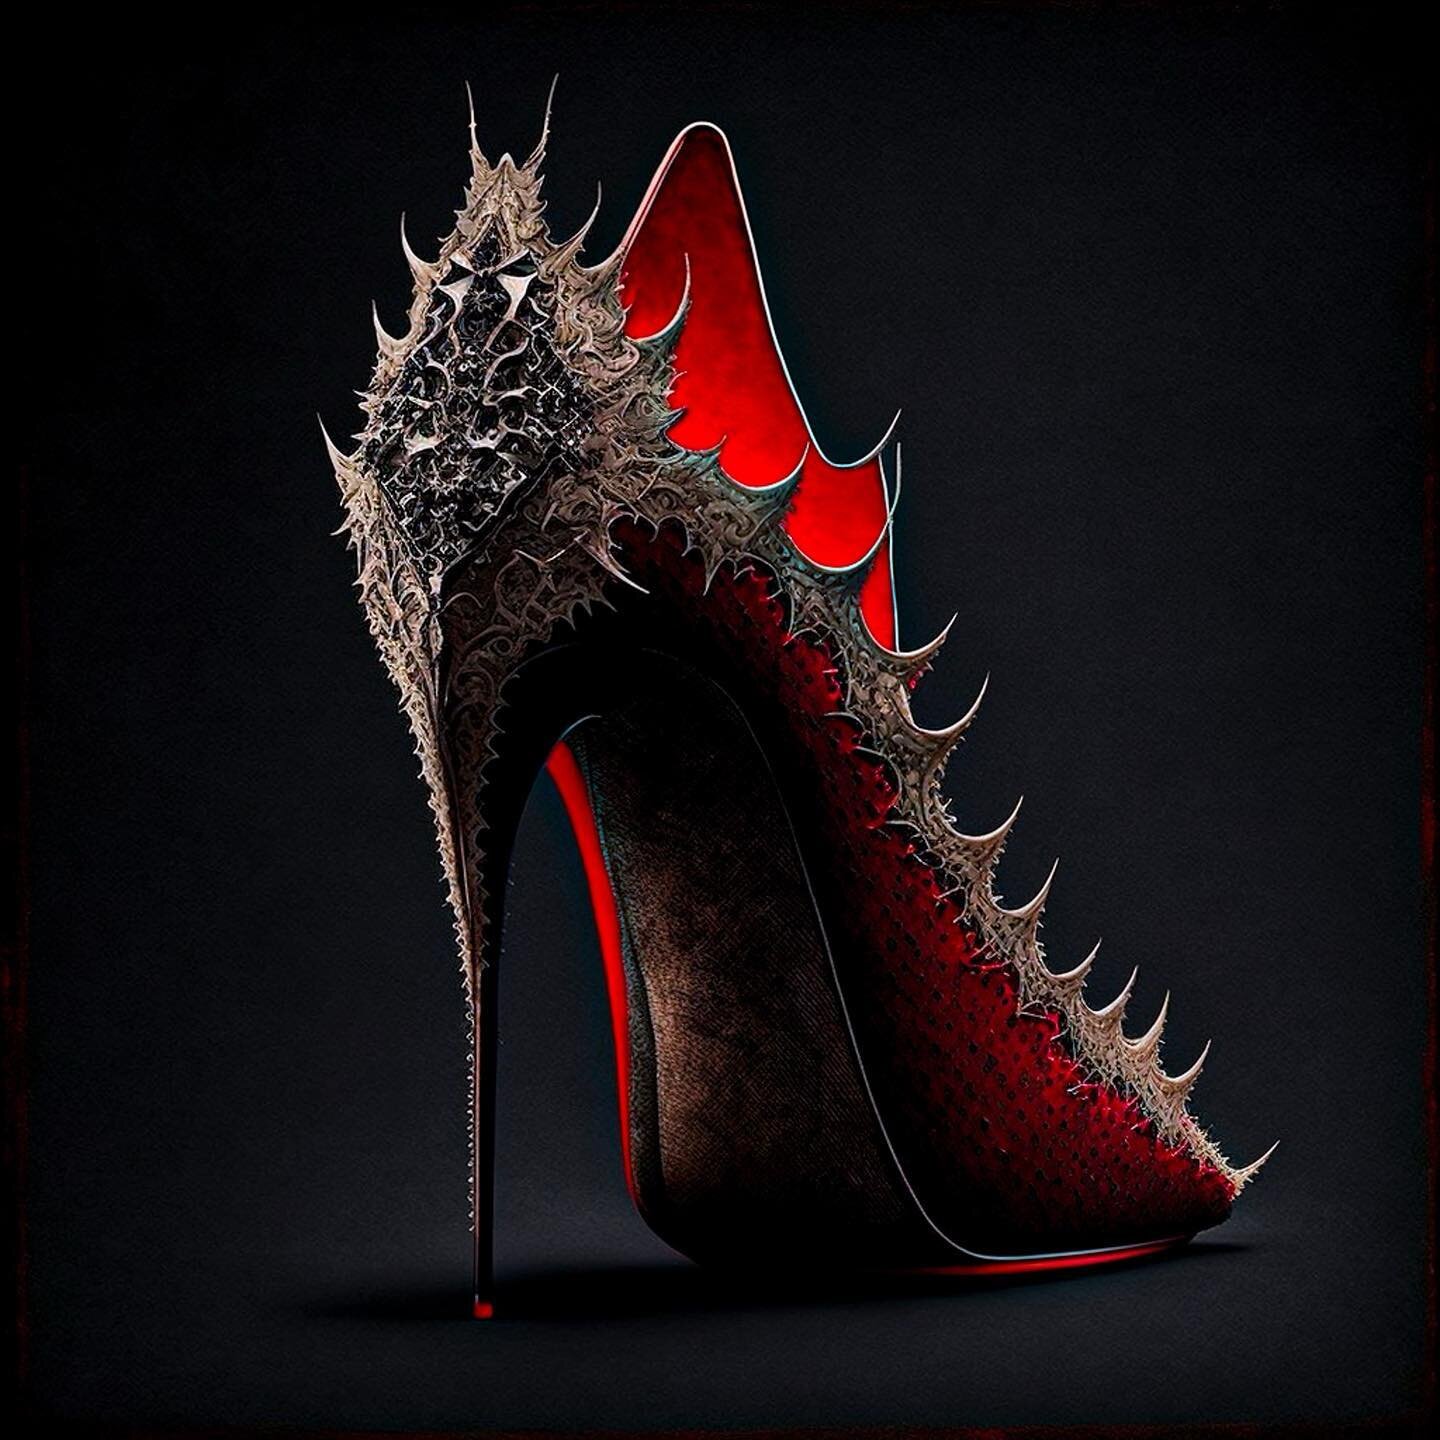 &quot;Unleash the dark elegance with our latest AI creation: Dracula - Christian Louboutin inspired heels and boots! The perfect fusion of horror and haute couture. &quot;I never drink... wine... unless I'm feeling dangerous.&quot; - Dracula  #Dracul